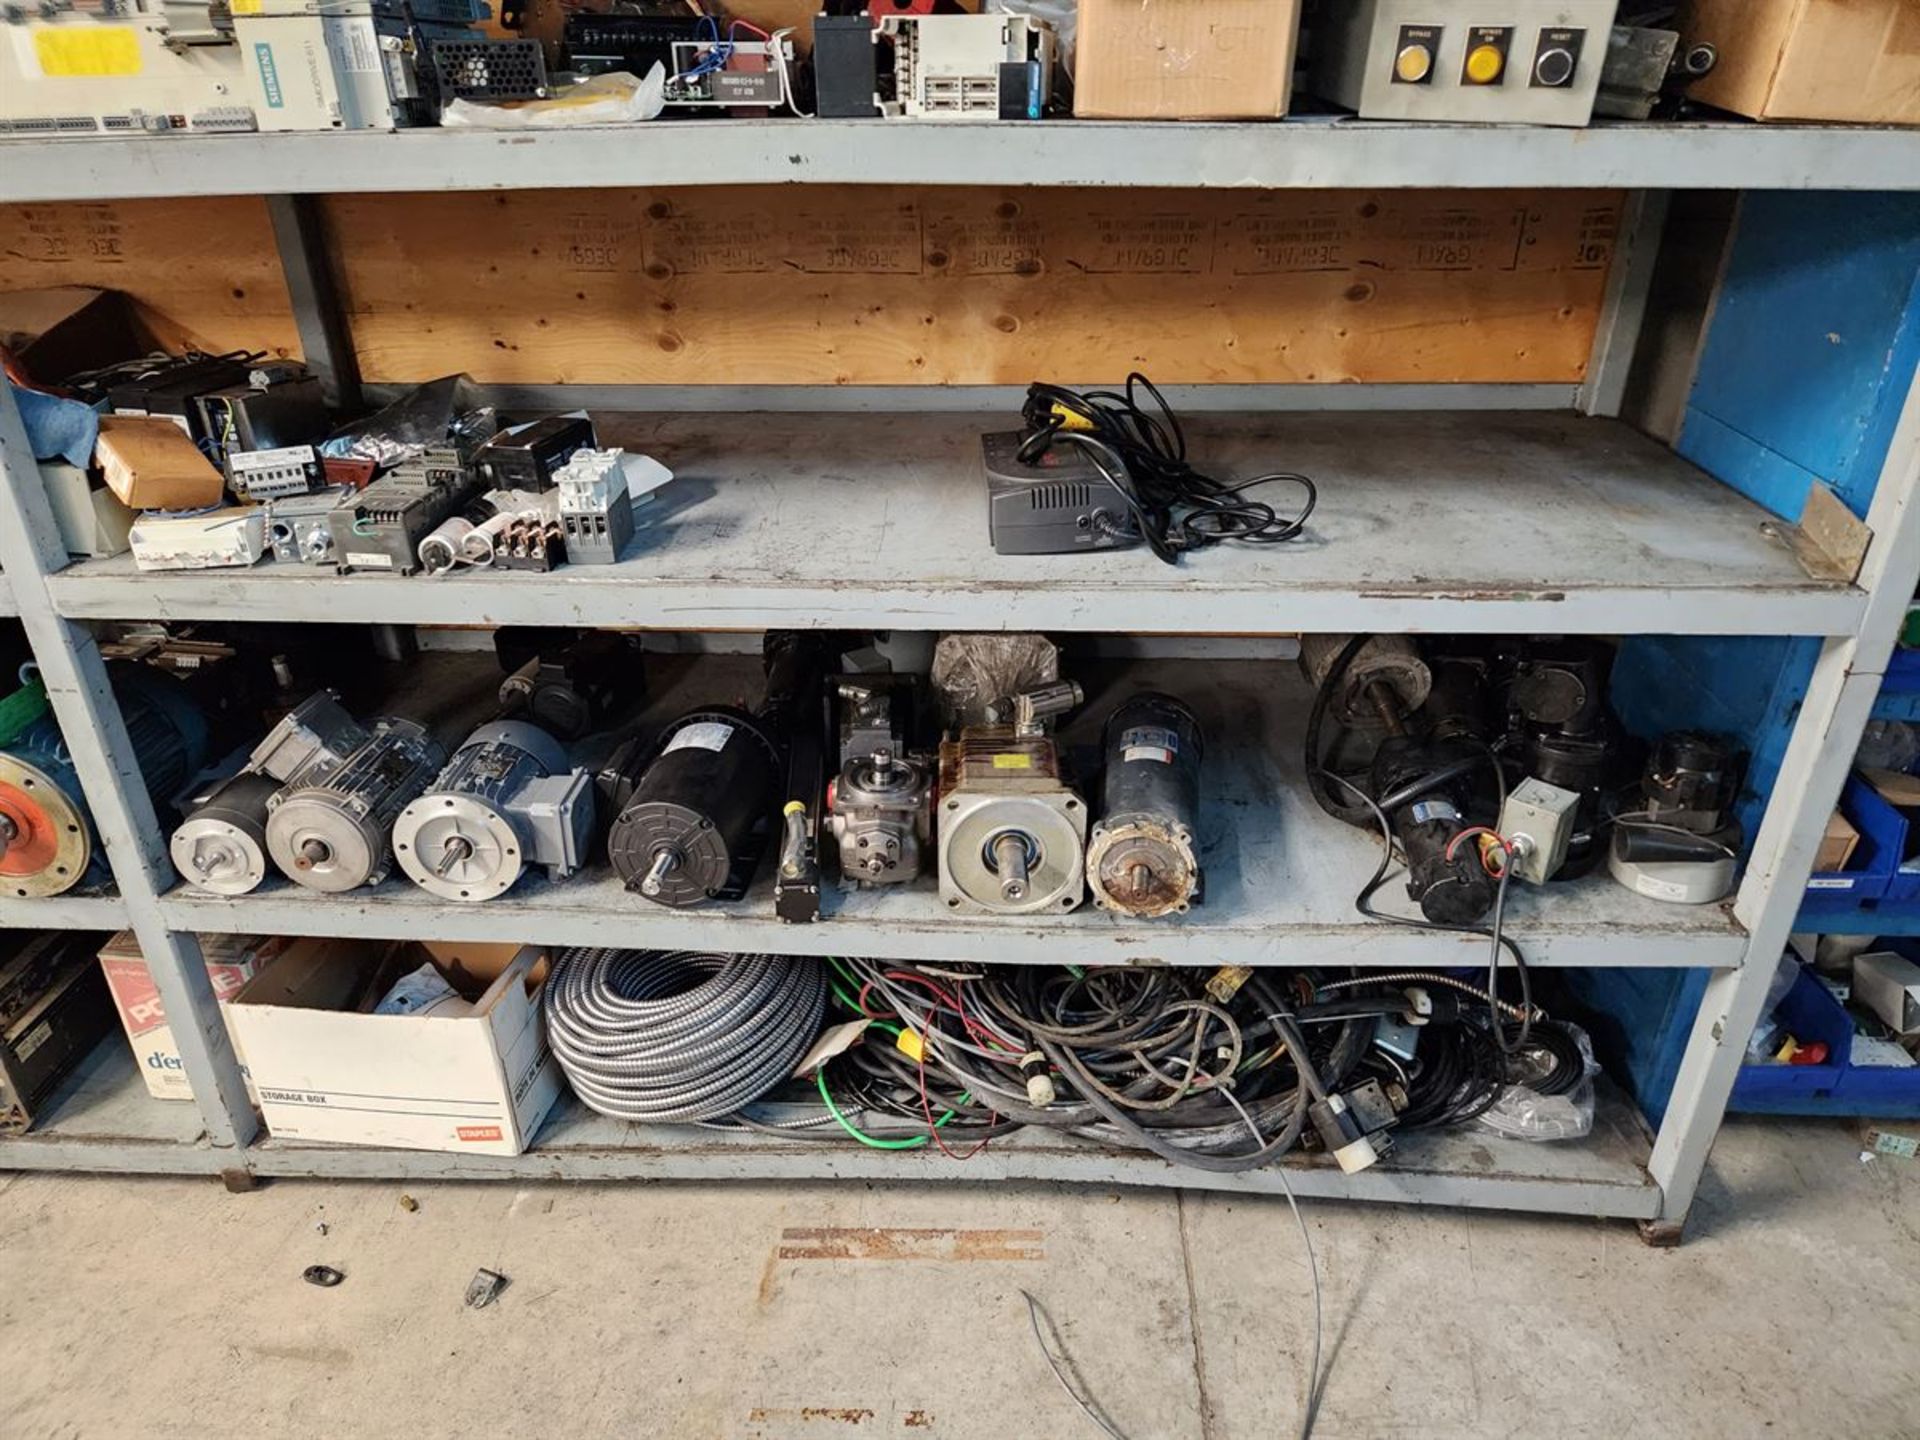 Steel Shelving w/ Electrical Contents, includes: Motors, Cables, Switches, Modules, etc. - Image 2 of 5